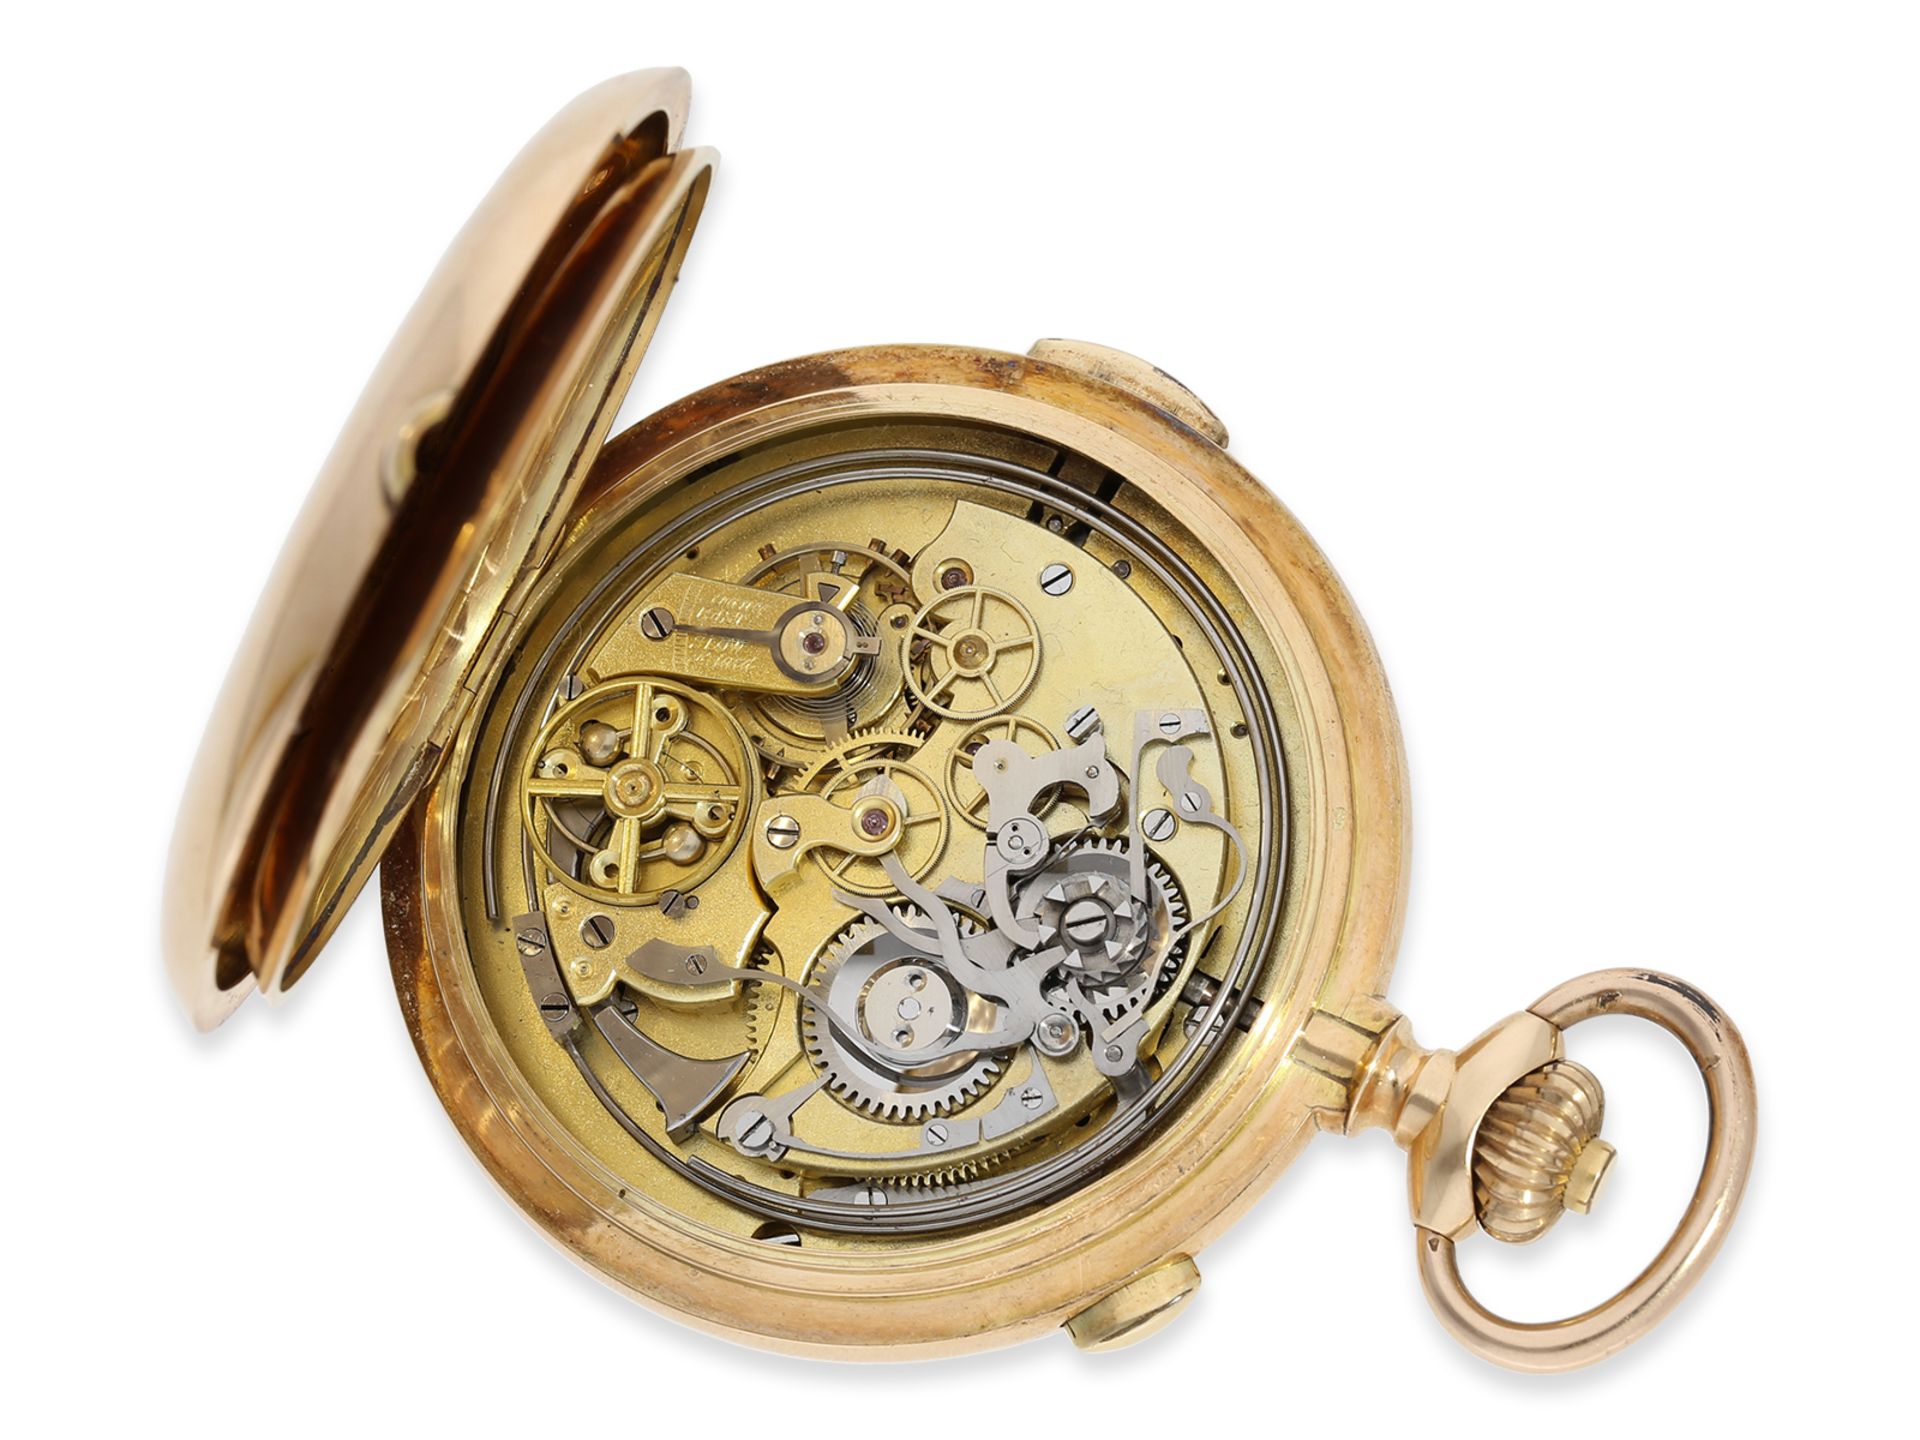 Pocket watch: impressive gold hunting case watch with repeater and chronograph, Audemars Freres Gene - Image 3 of 8